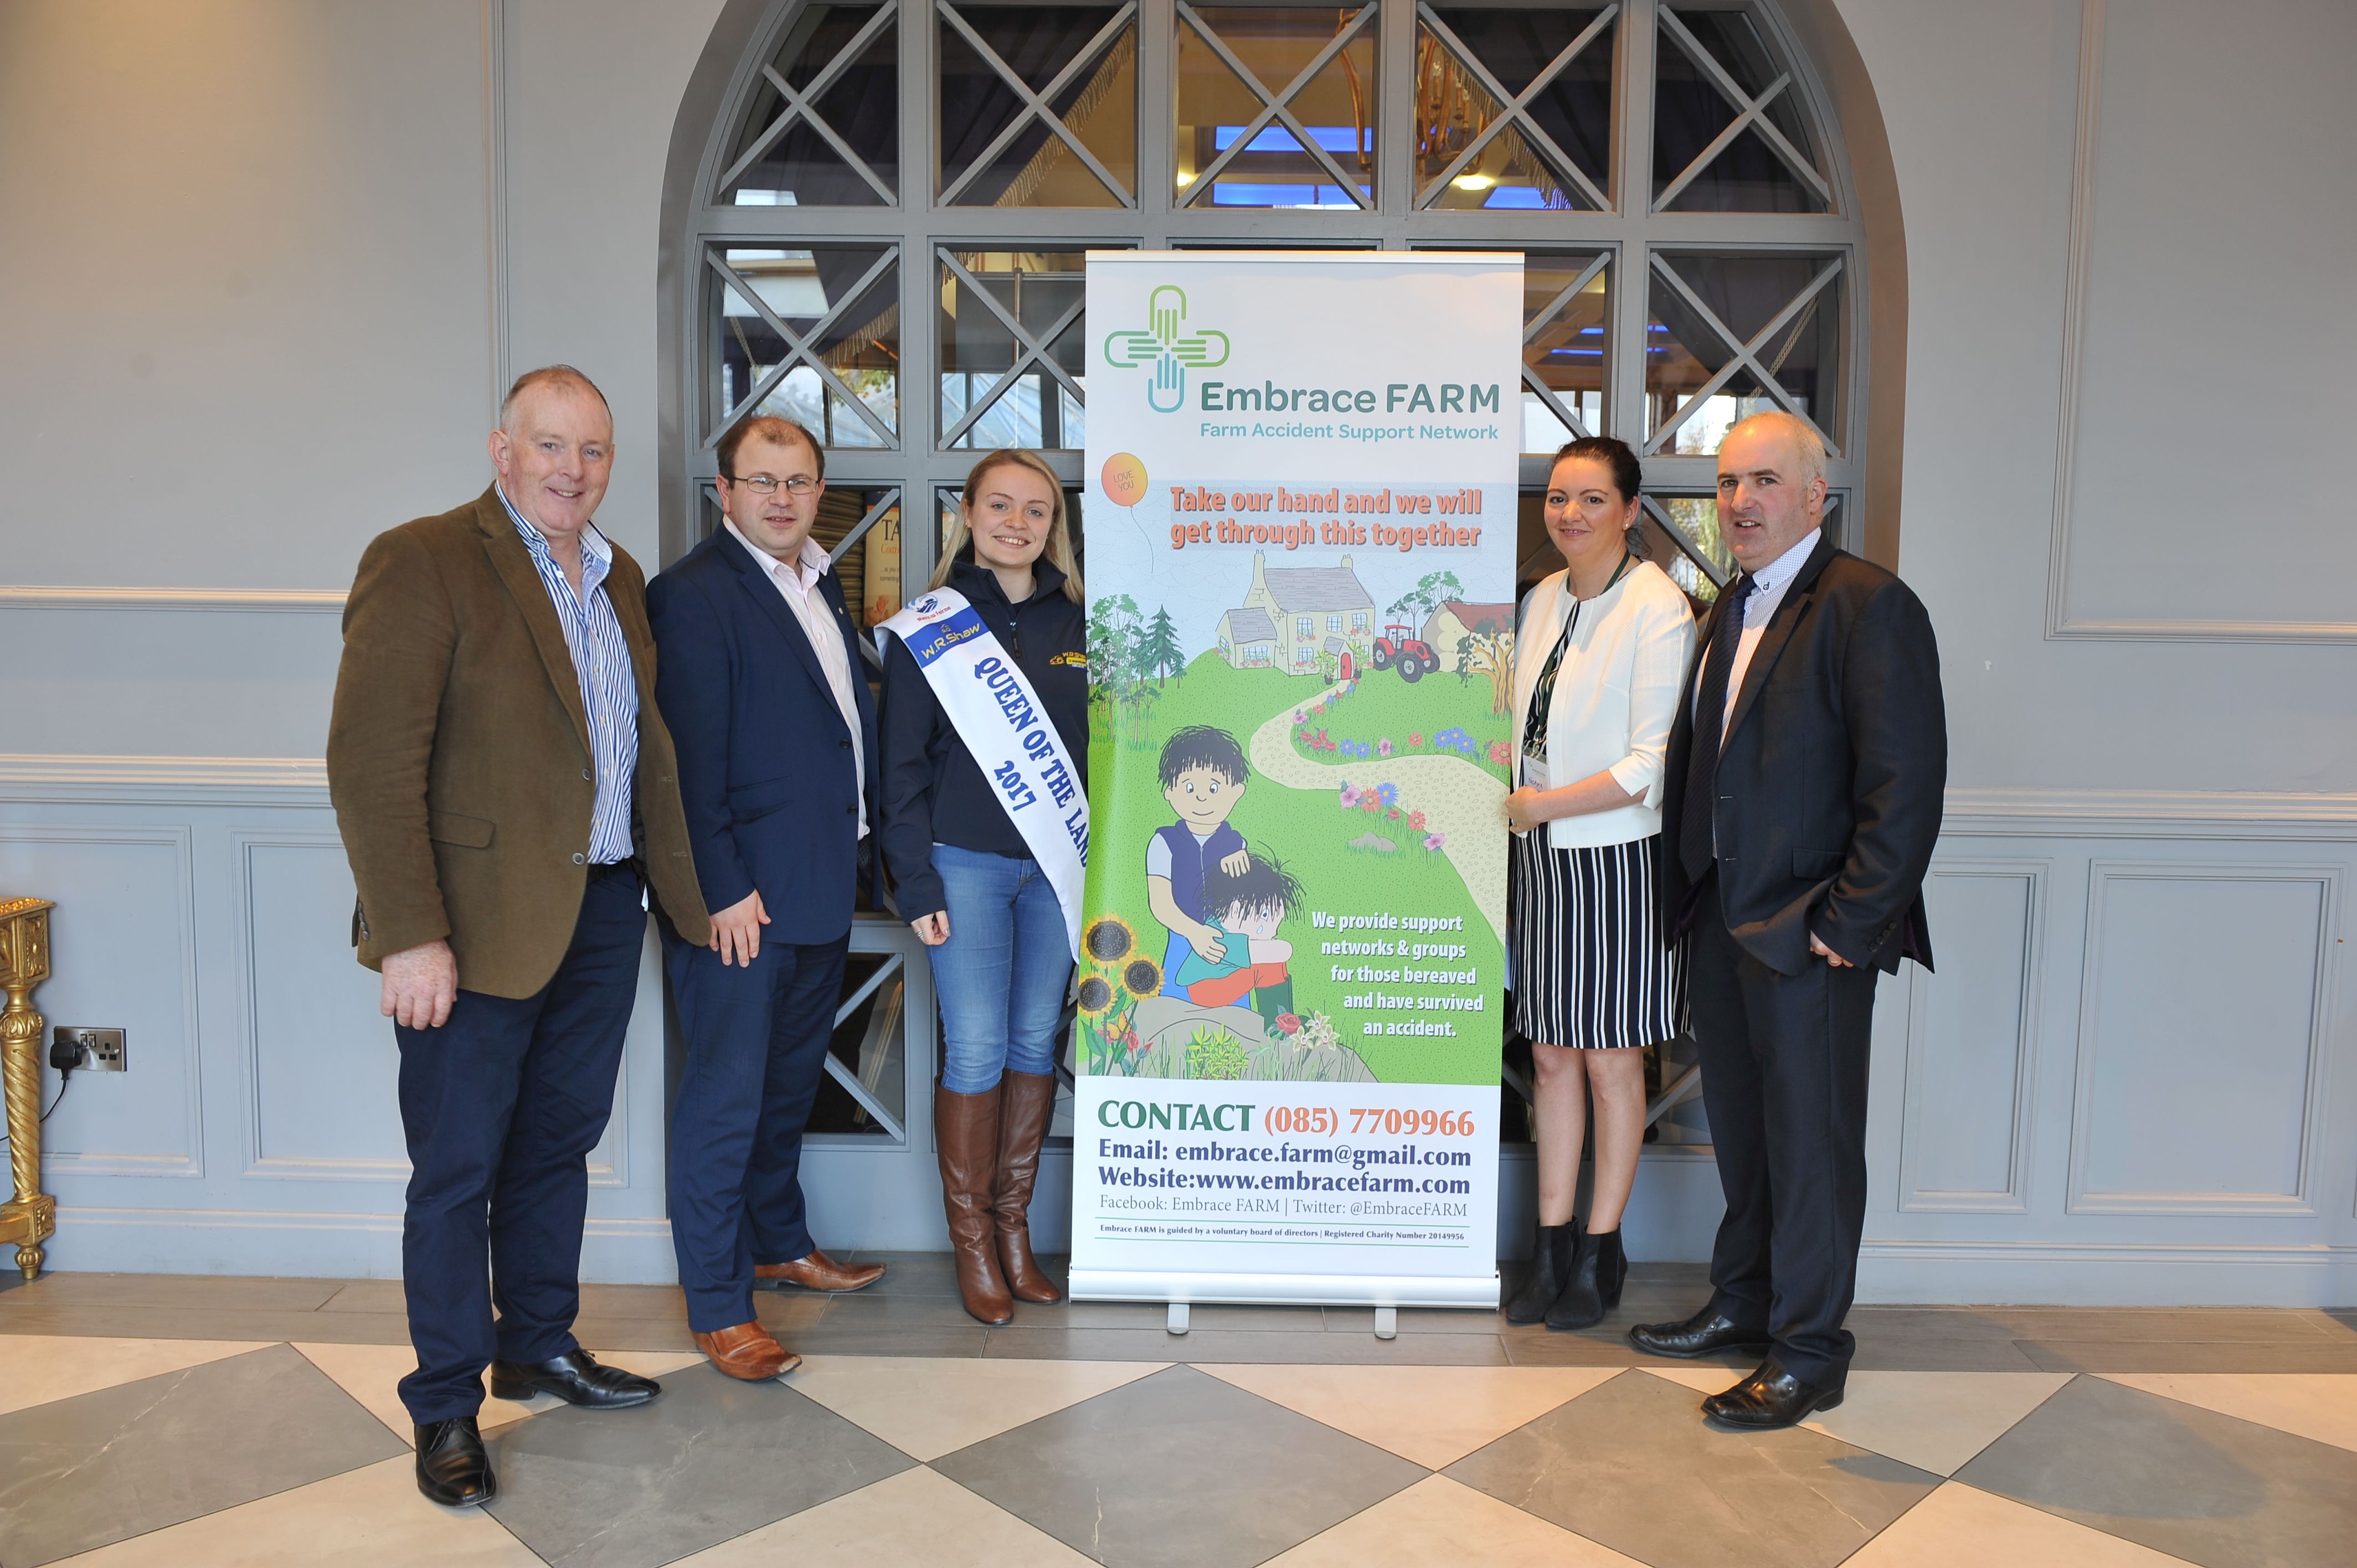 Pictured at the Embrace Farm Accident Survivors Conference in Portlaoise-on November 25 were Francie O’Gorman, Ballinakill, Chairman Laois IFA, James Healy, National President of Macra Na Feirme, Emma Birchall, Queen of the Land with Brian and Norma Rohan, Mountrath, Co. Laois, founders of Embrace Farm